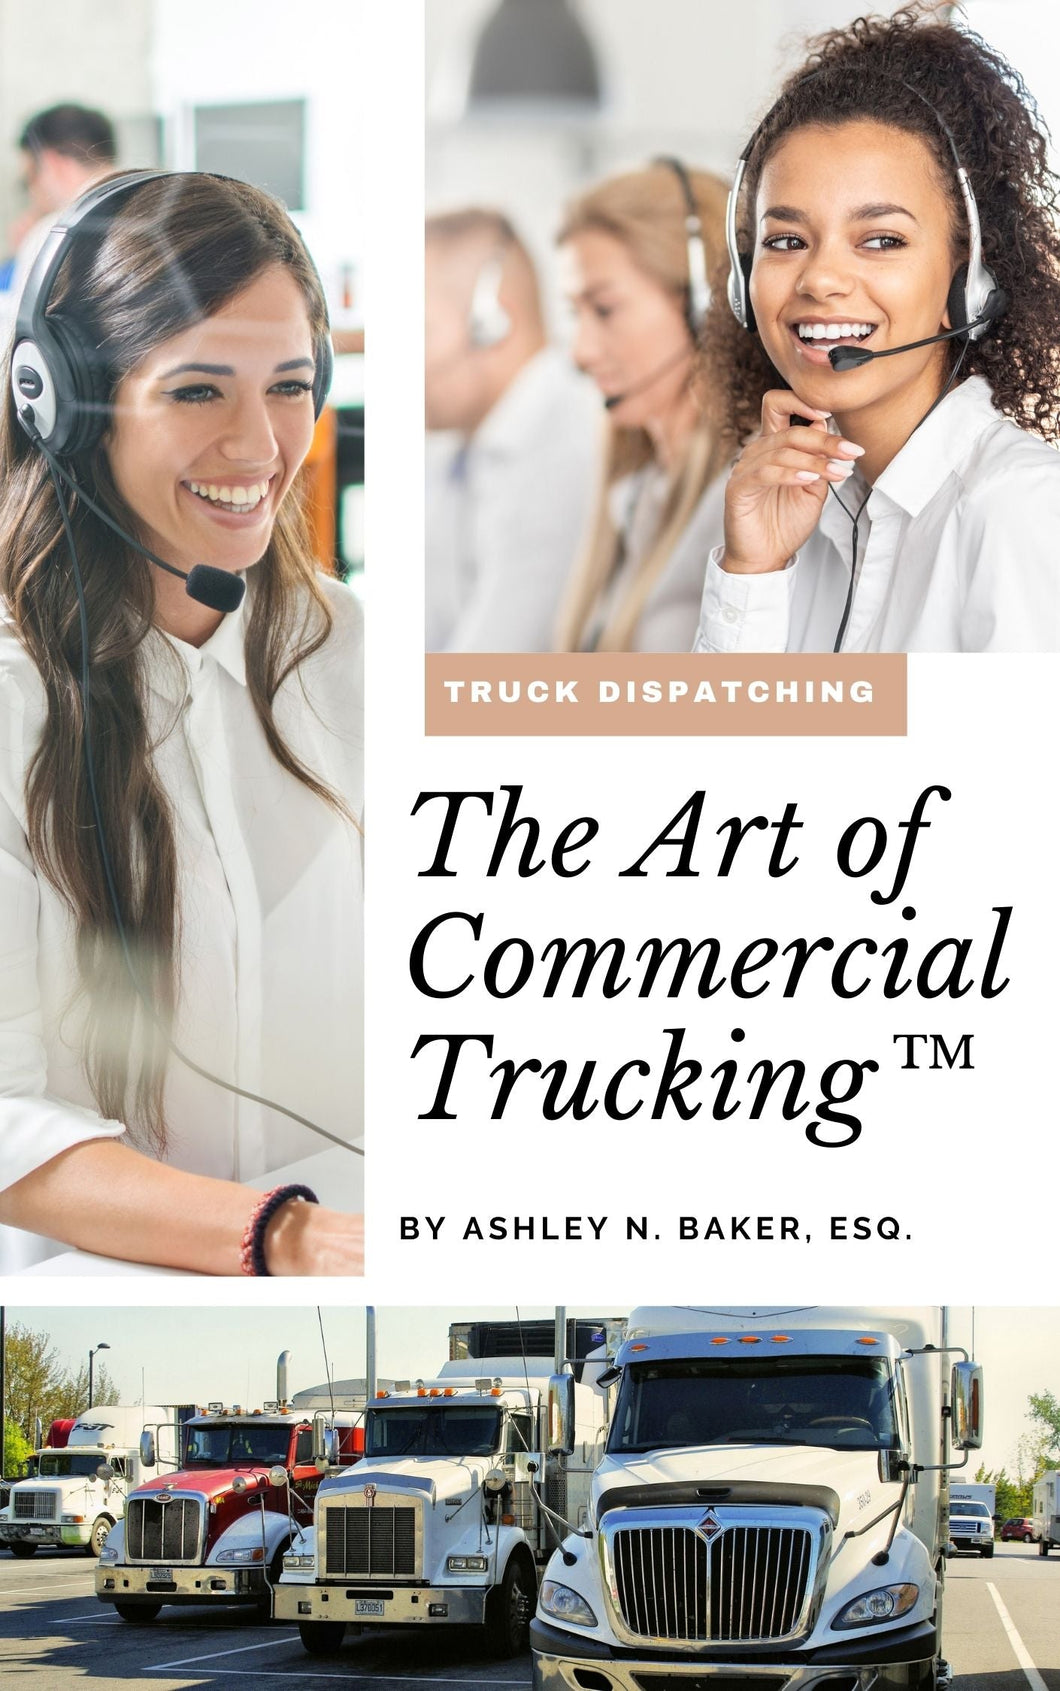 The Art of Commercial Trucking™: Truck Dispatching (Book +Workbook)